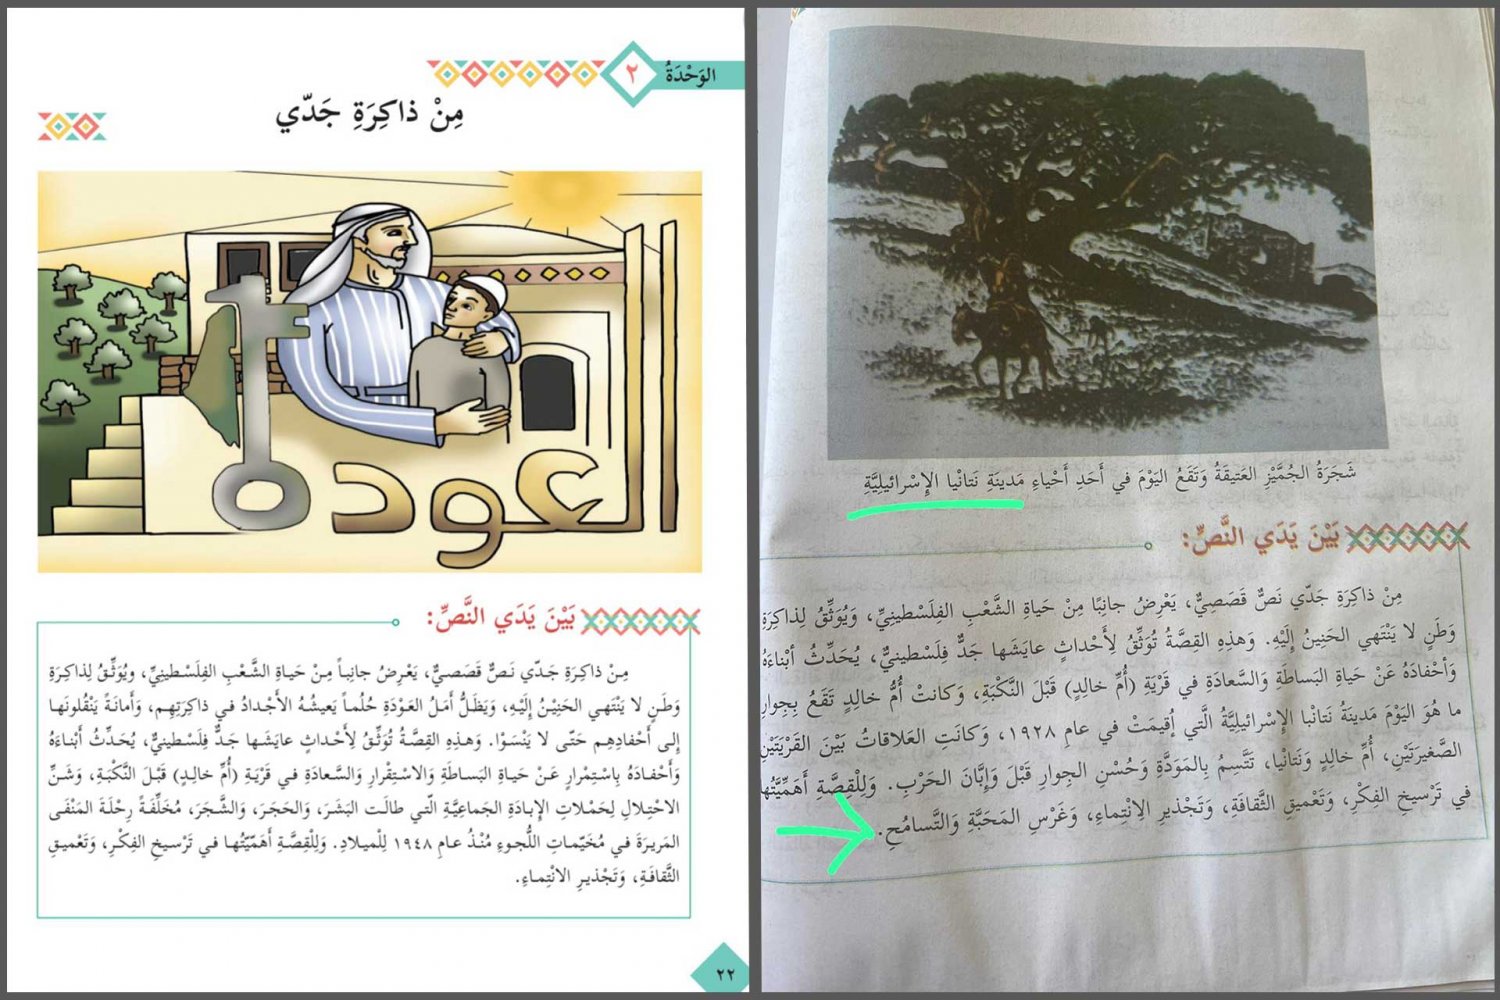 A page from a Palestinian textbook, showing Israeli alterations